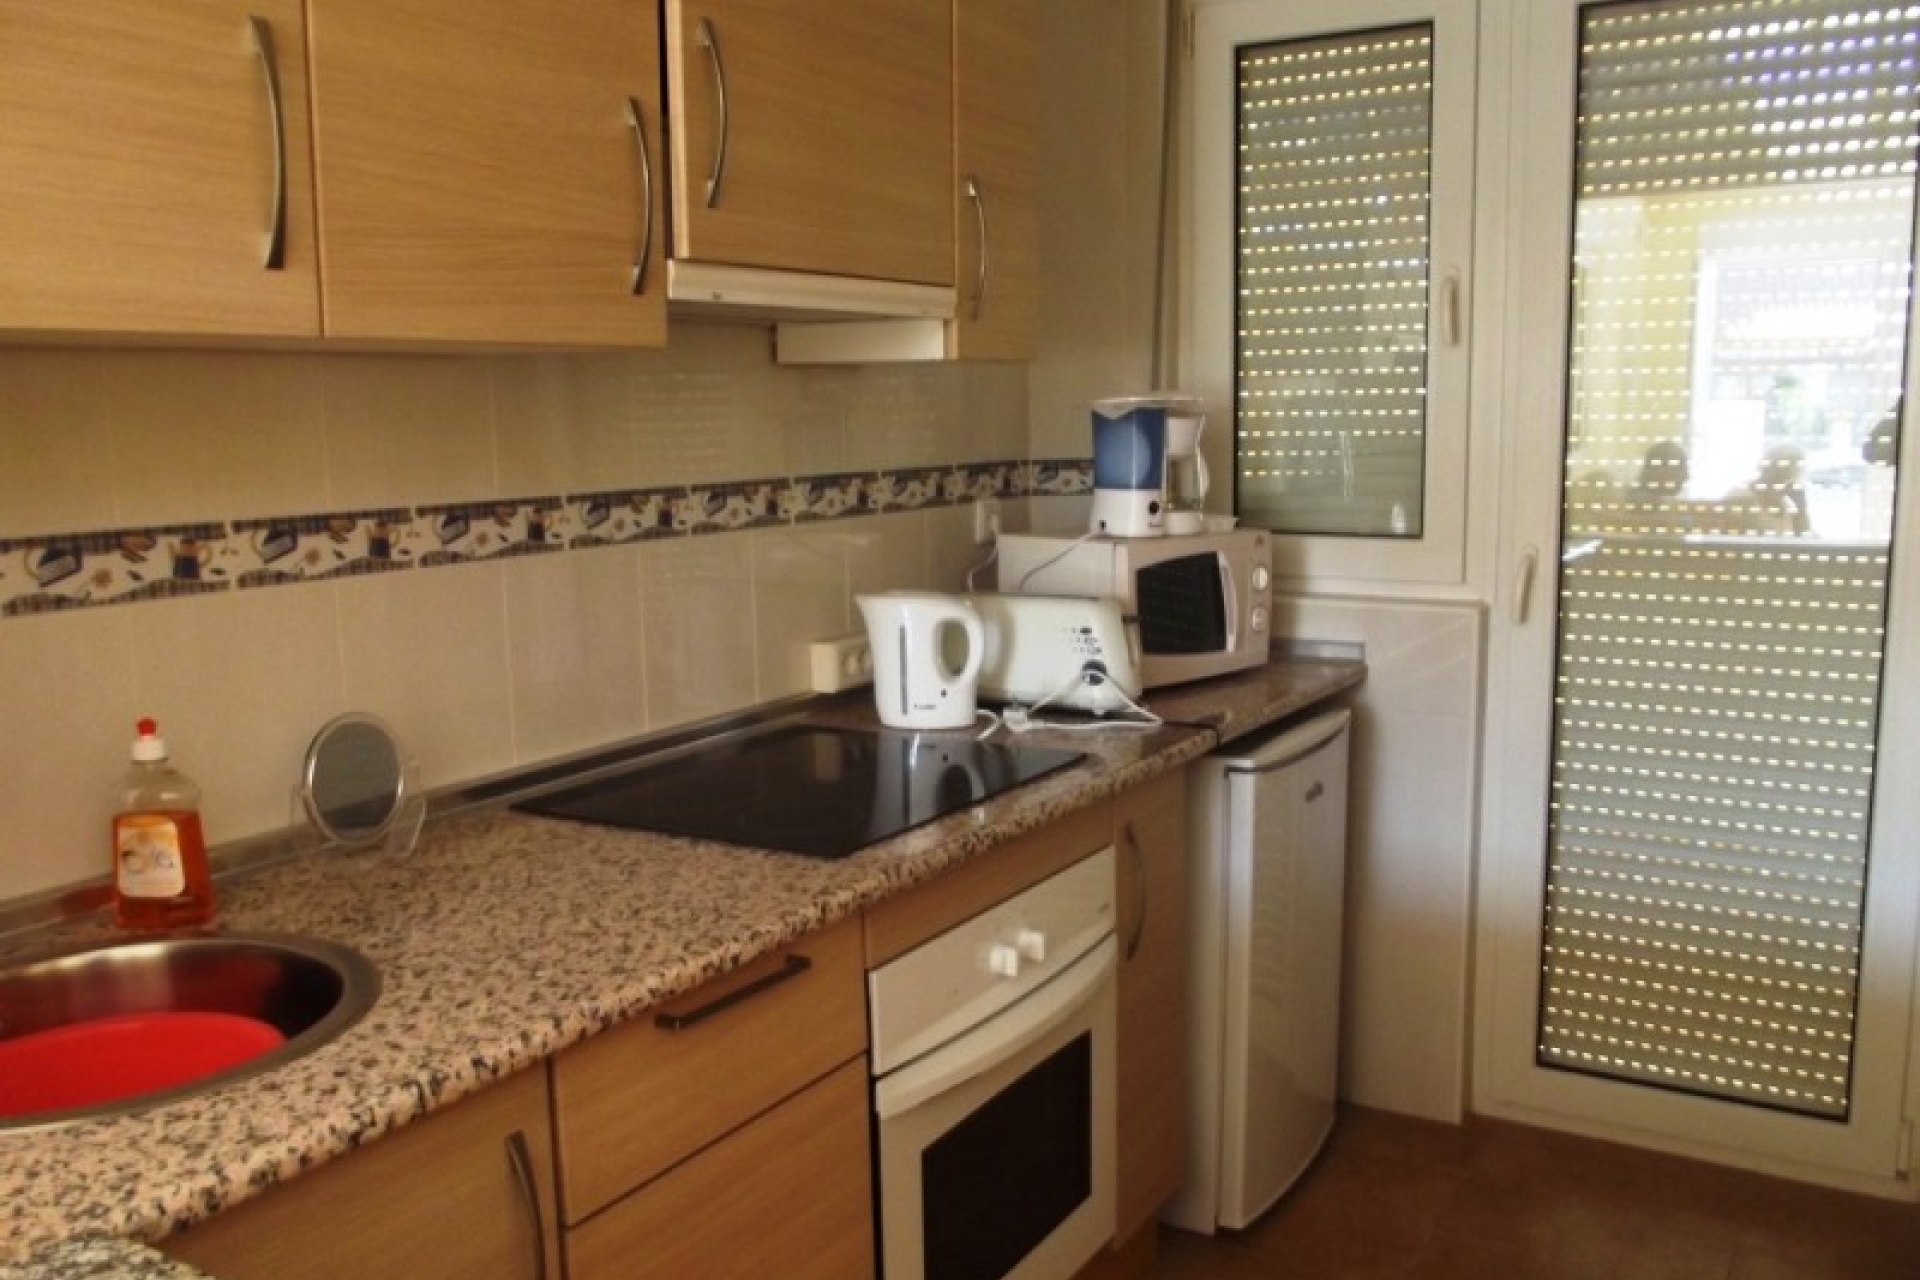 La Zenia on Spains Orihuela Costa, Spain cheap bargain property for sale close to Playa Flamenca and Cabo Roig for sale.